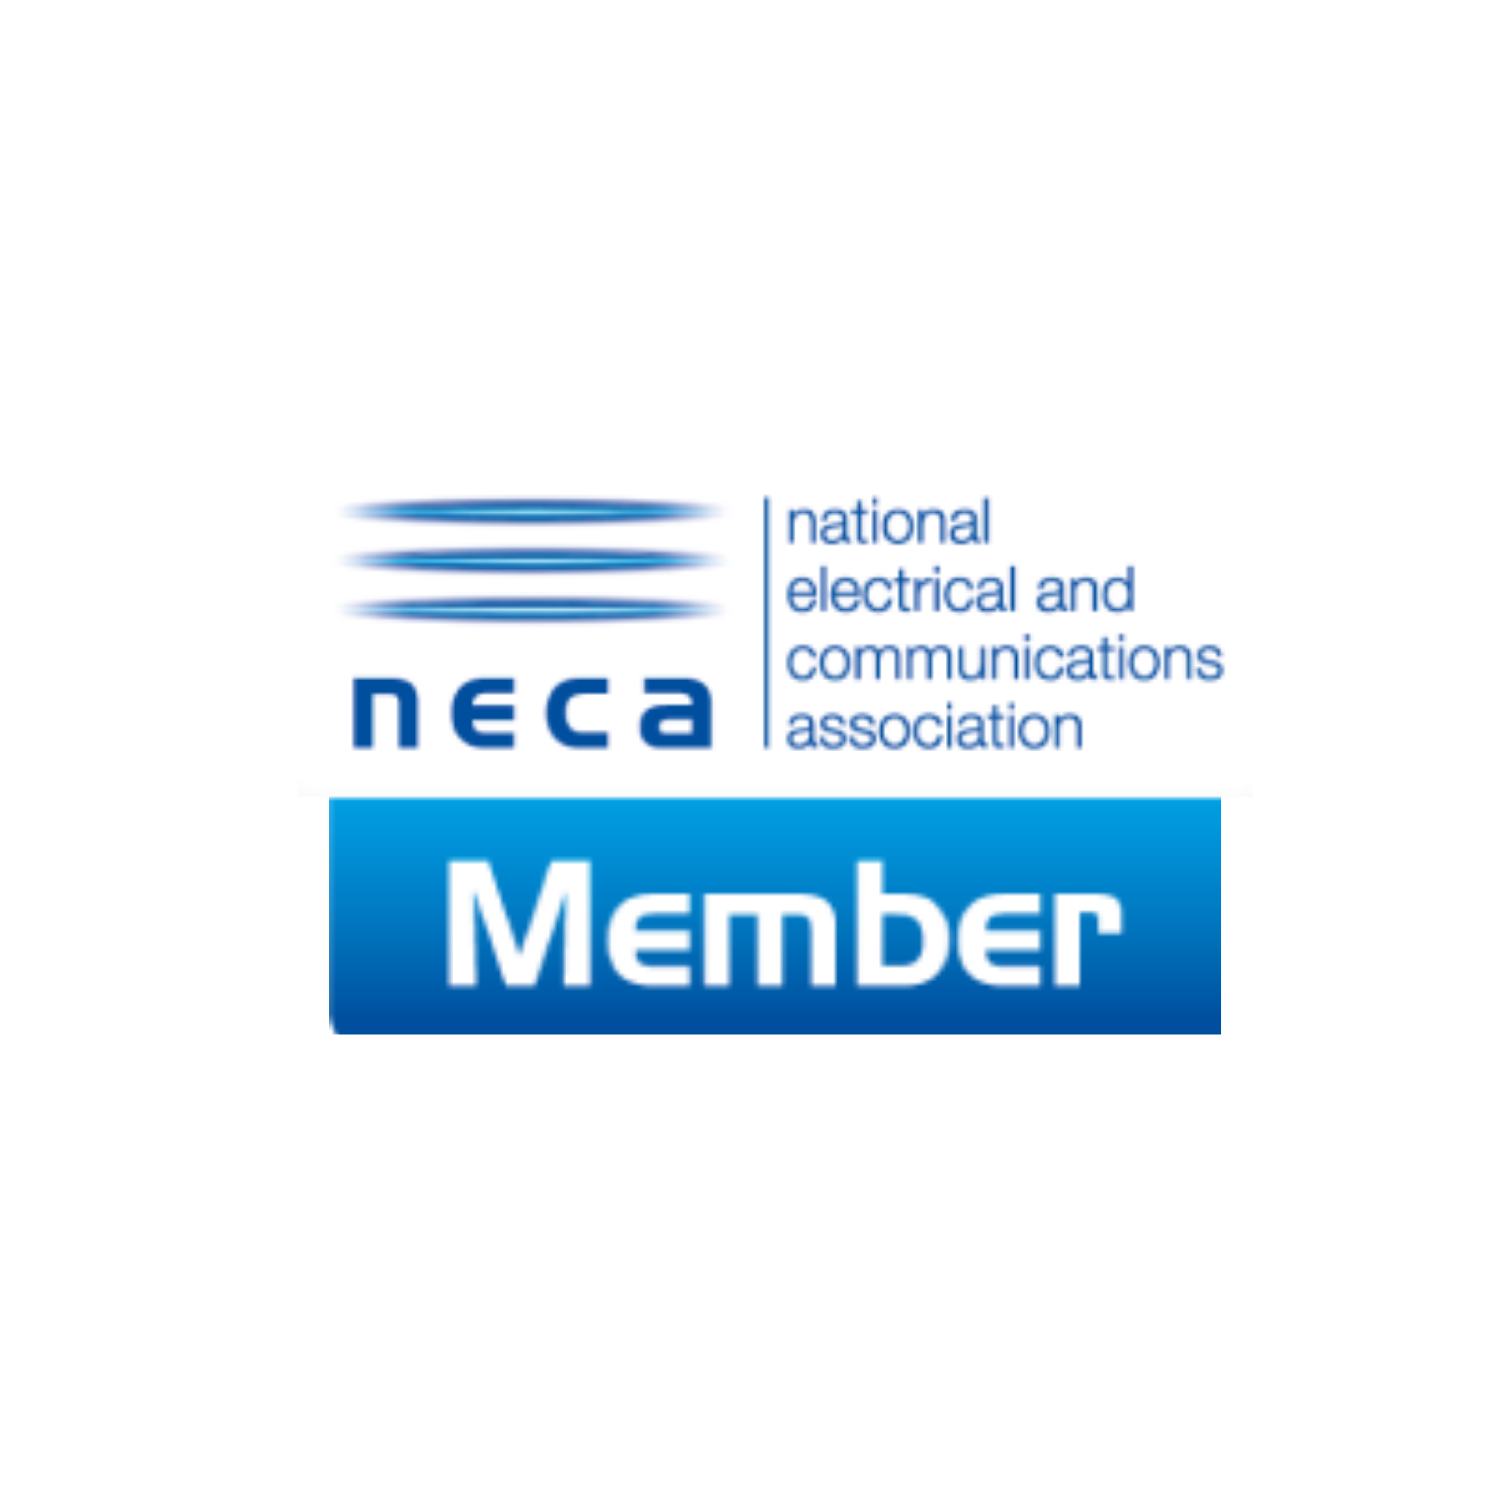 NECA National Electrical and Comminications Association